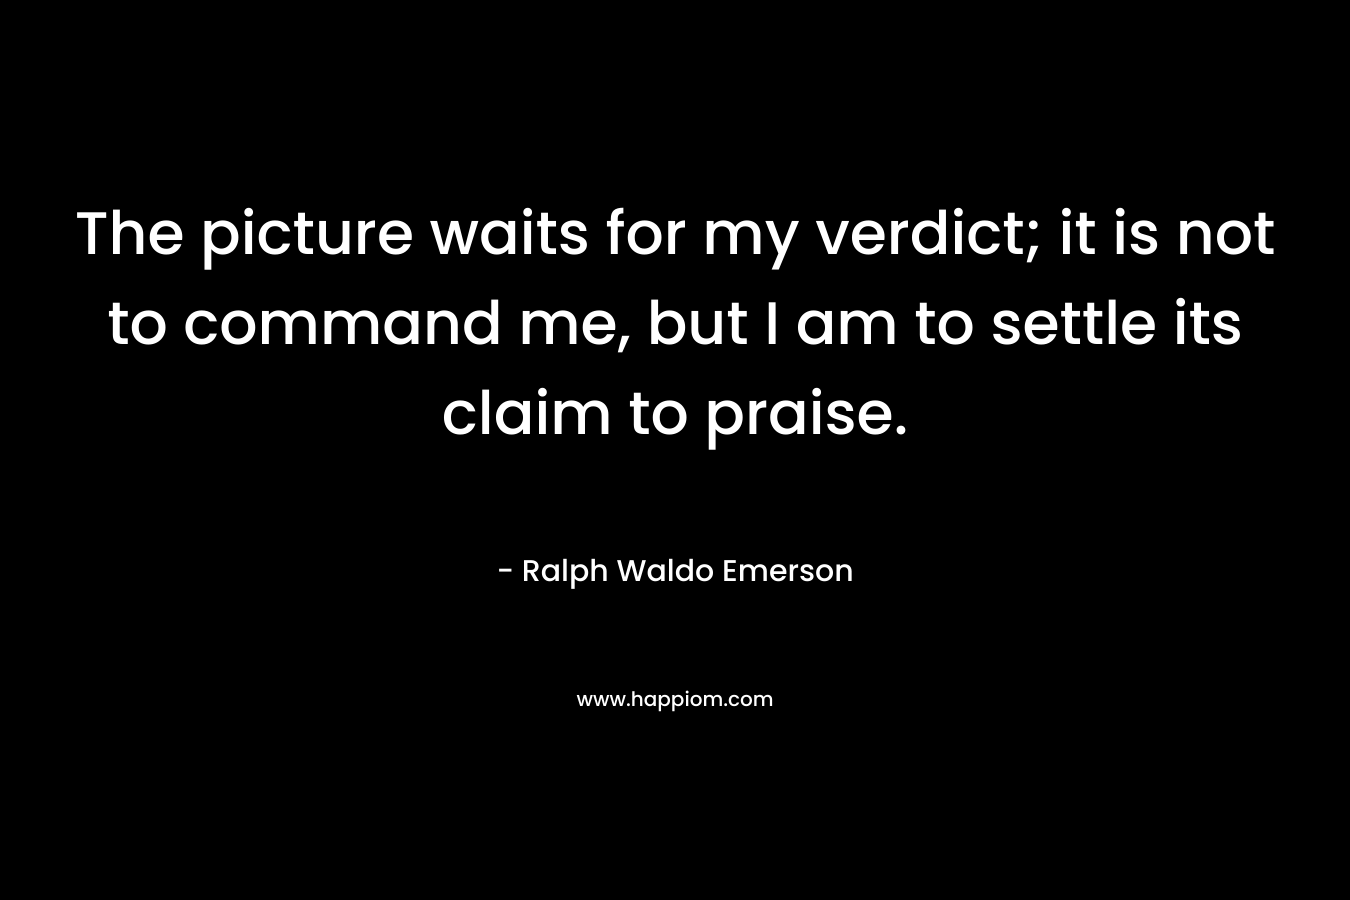 The picture waits for my verdict; it is not to command me, but I am to settle its claim to praise. – Ralph Waldo Emerson